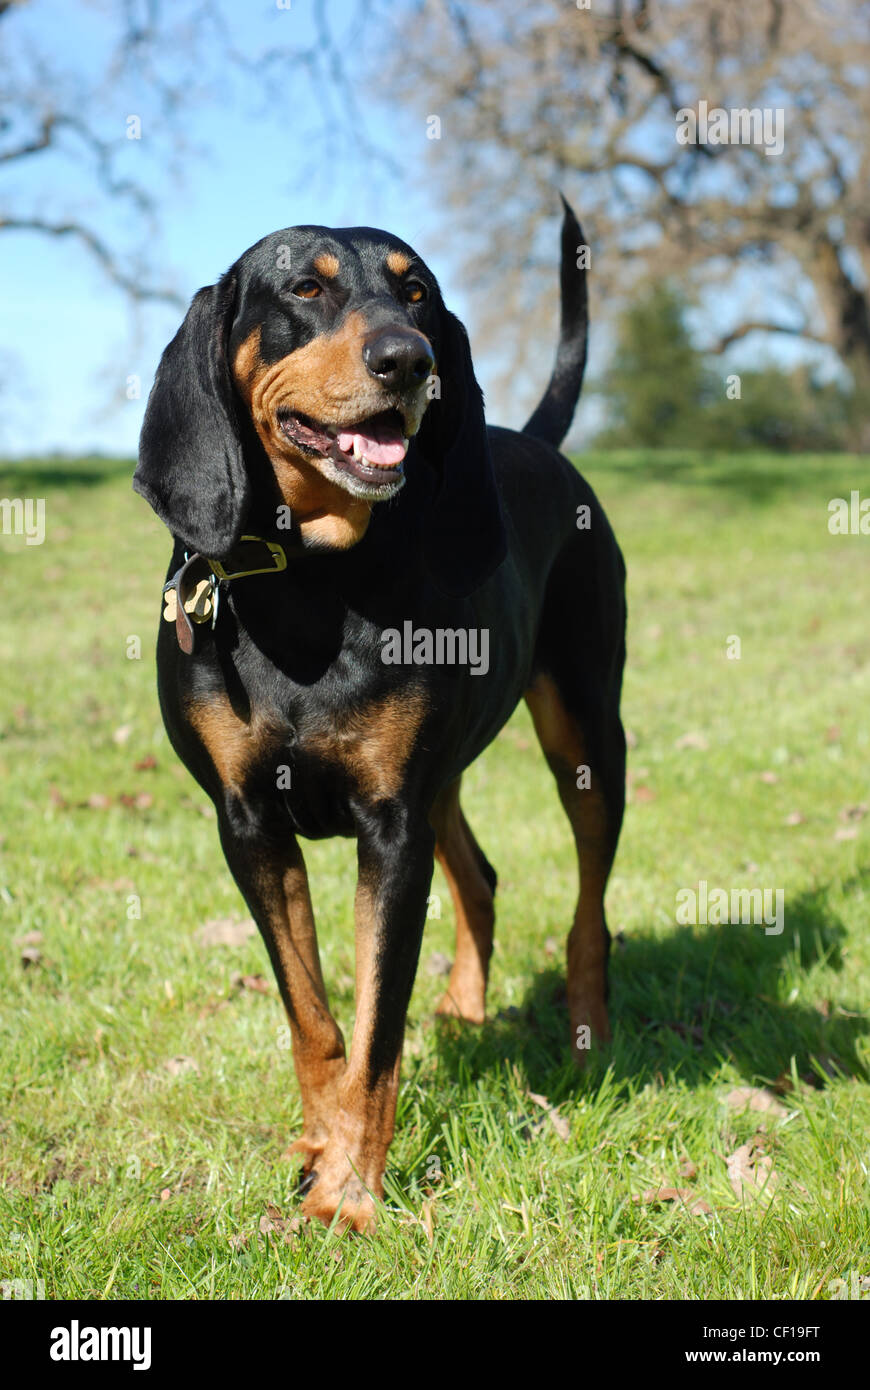 Black and Tan Coonhound portrait, full body standing Stock Photo